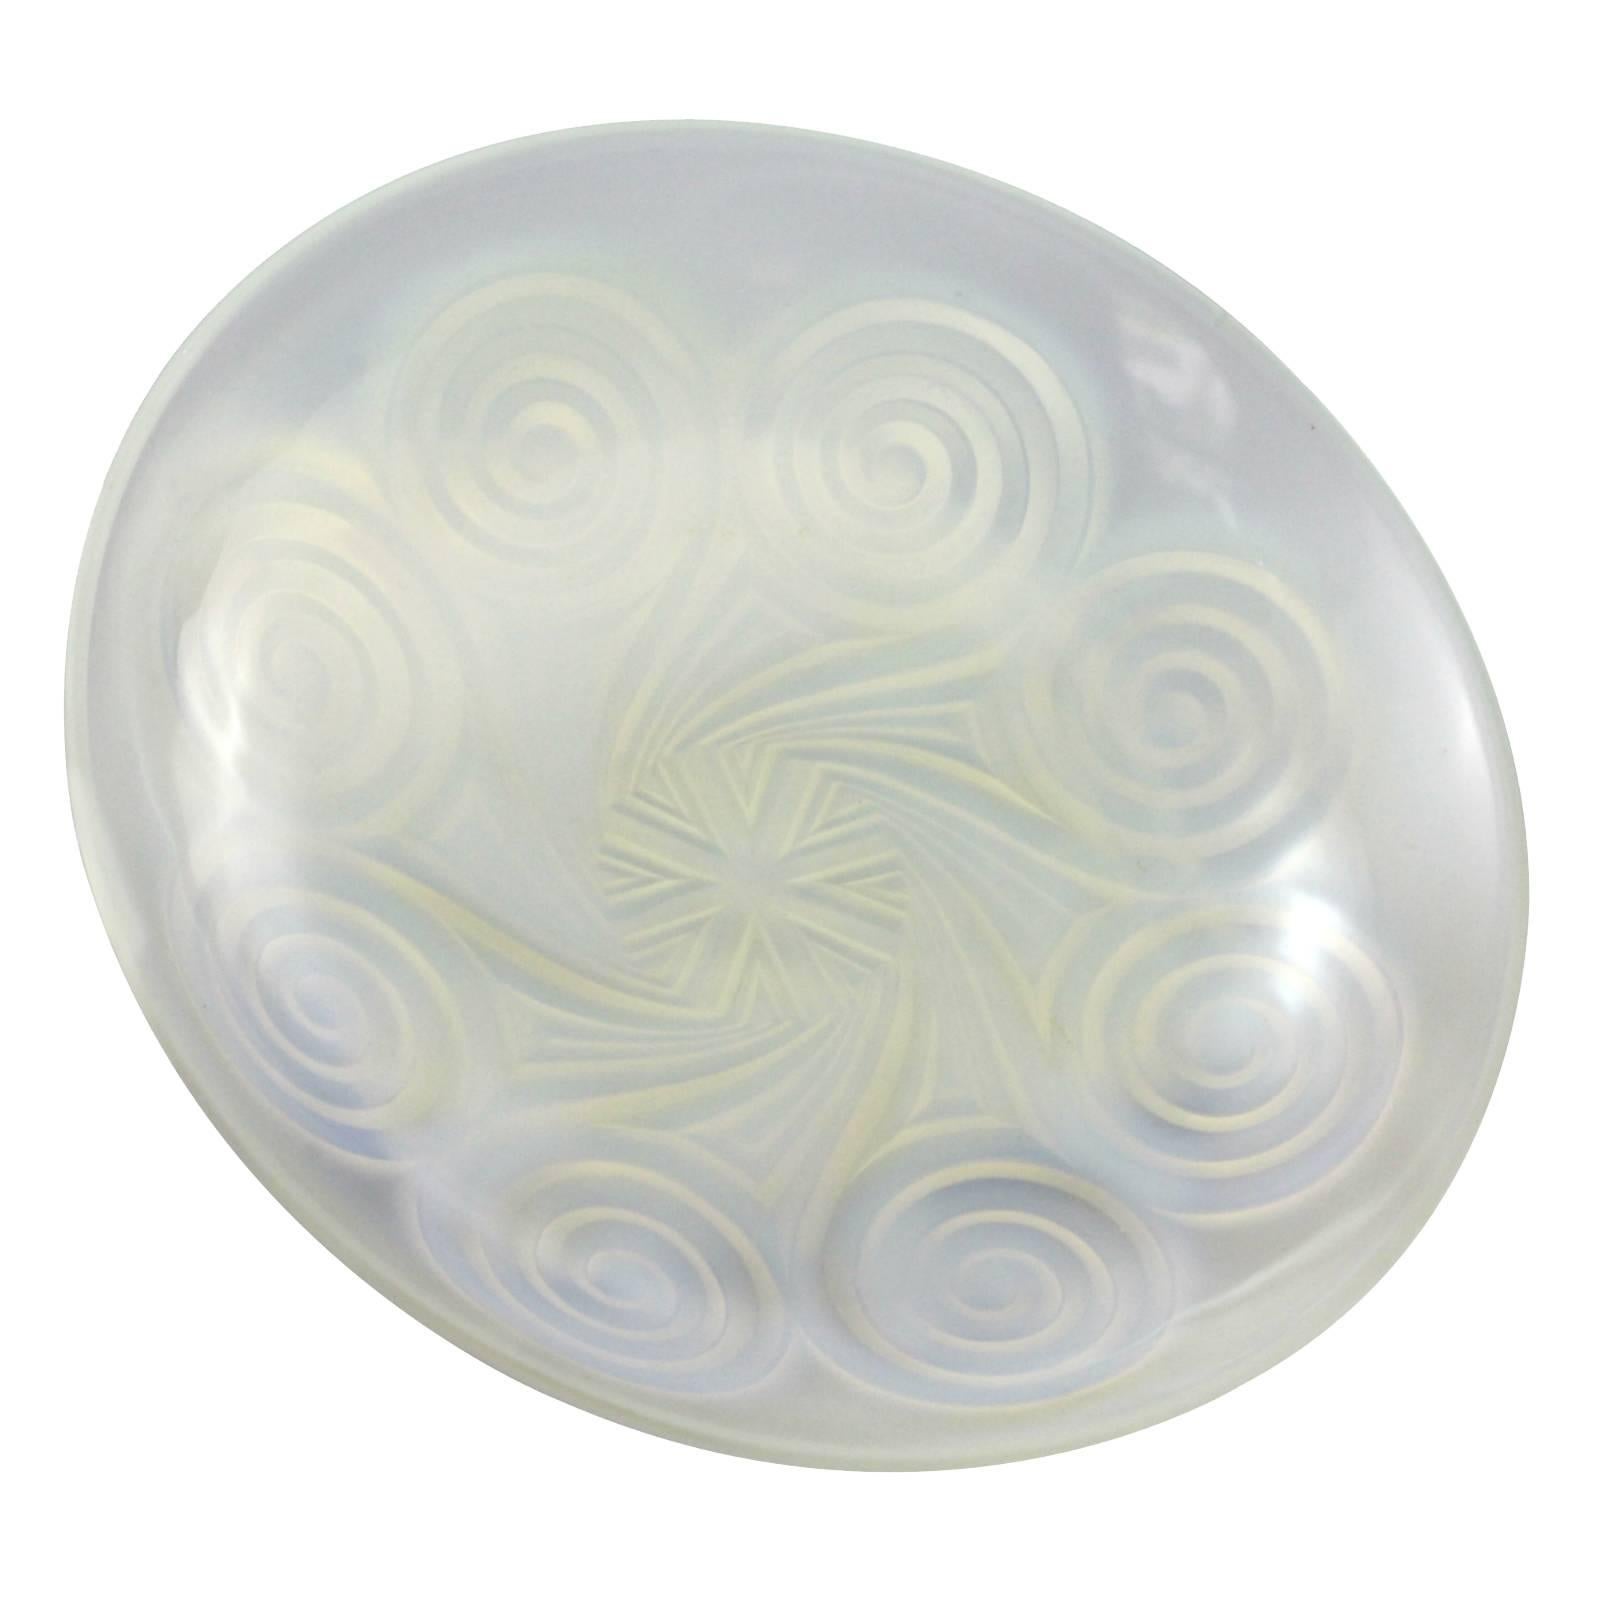 Large 20th Century Art Deco Opalescent Glass Bowl with Swirl Pattern by Etling For Sale